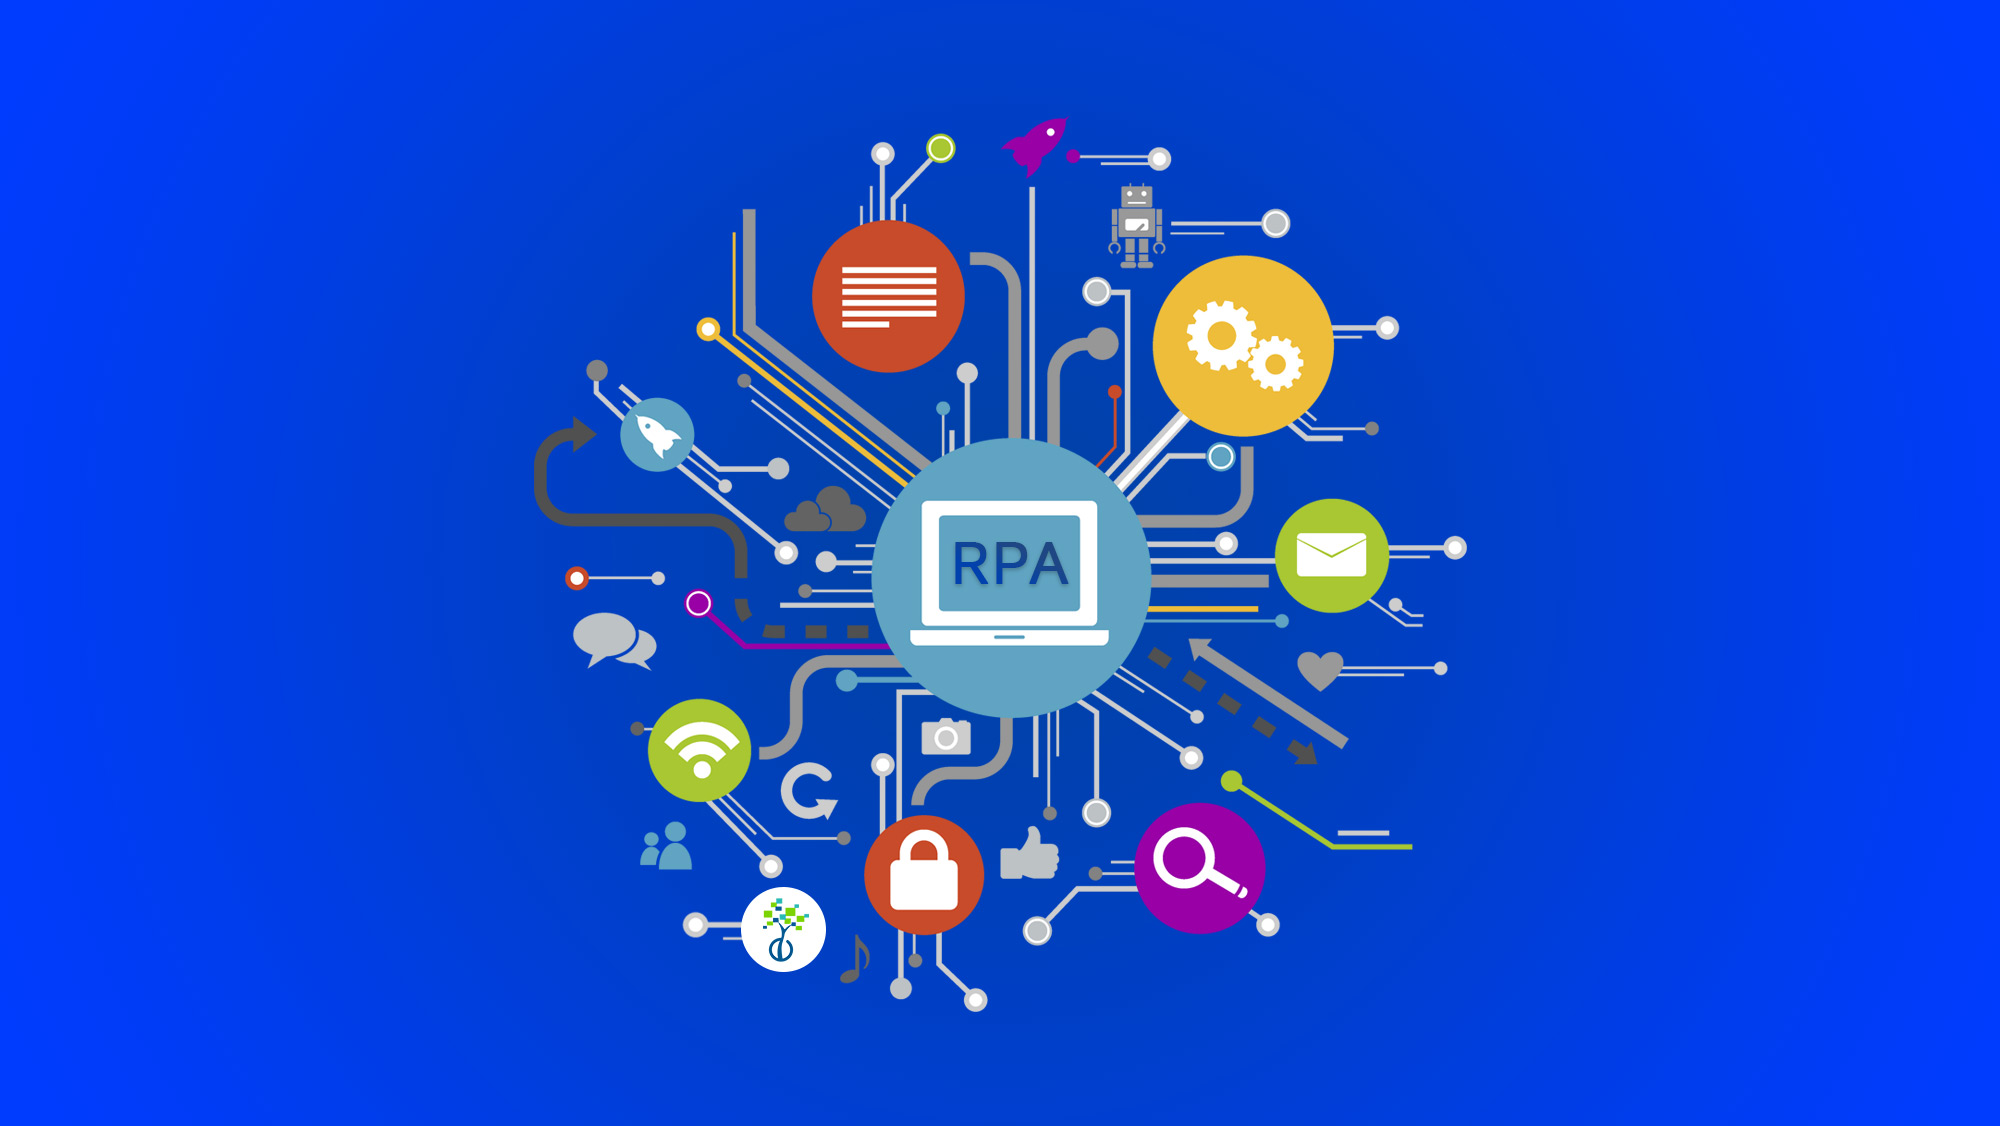 The Role of RPA in Digital Transformation